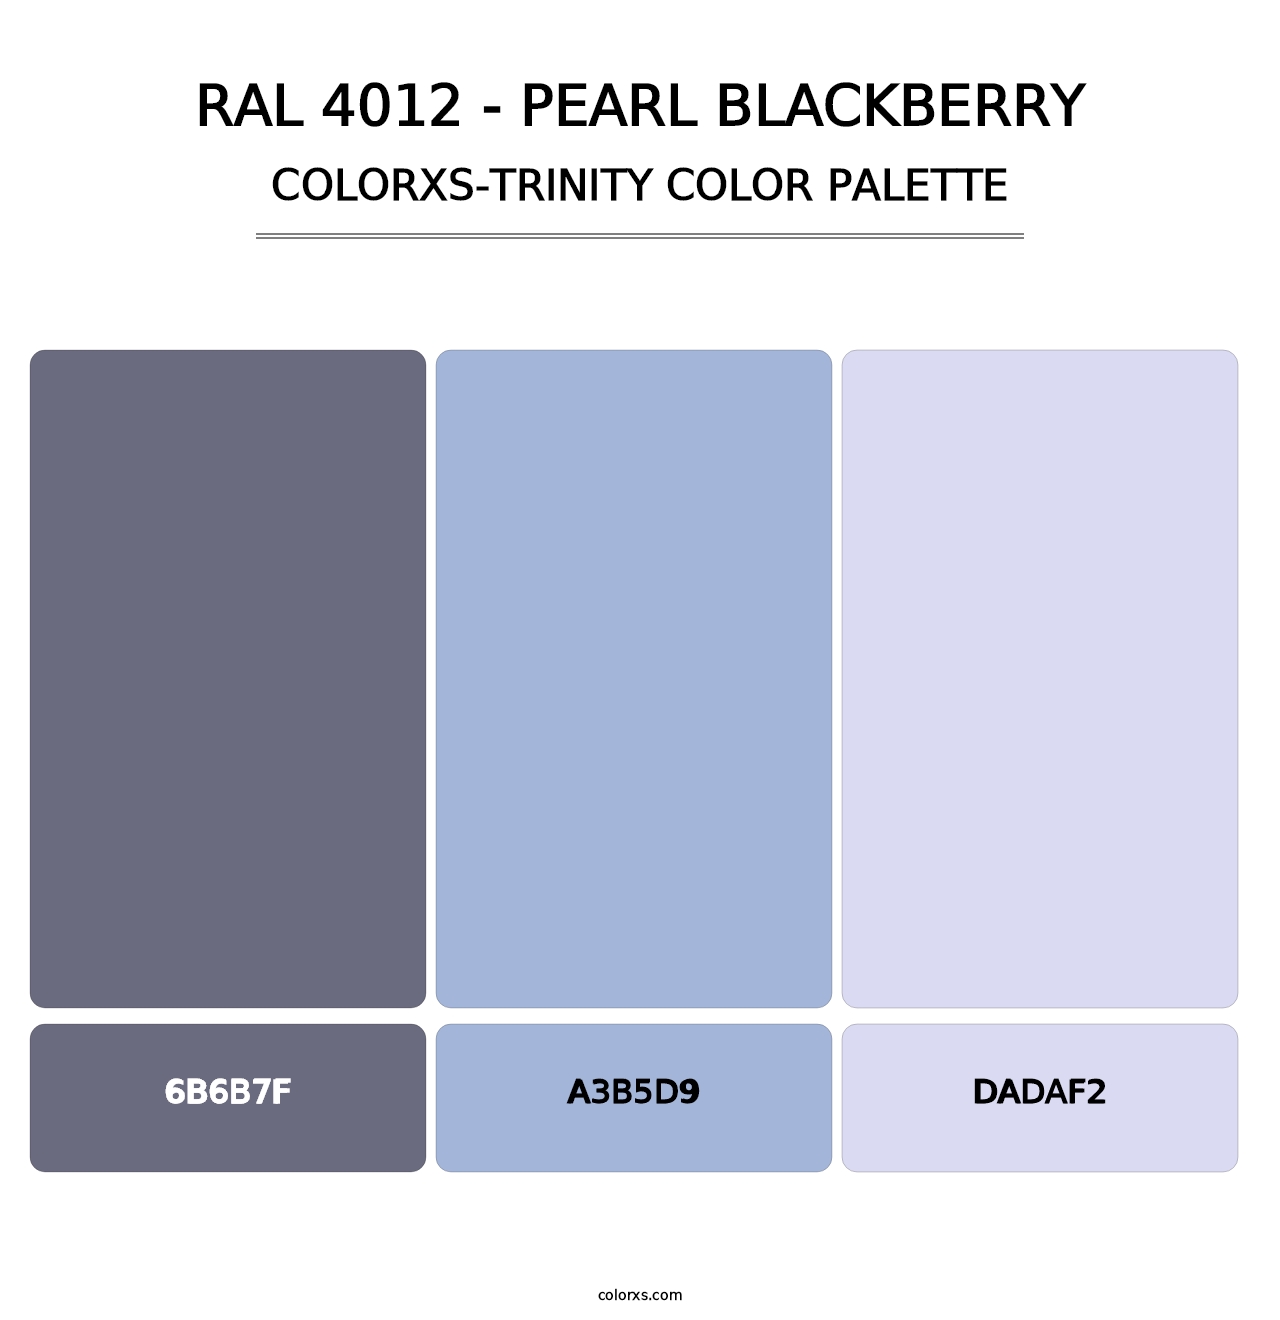 RAL 4012 - Pearl Blackberry - Colorxs Trinity Palette